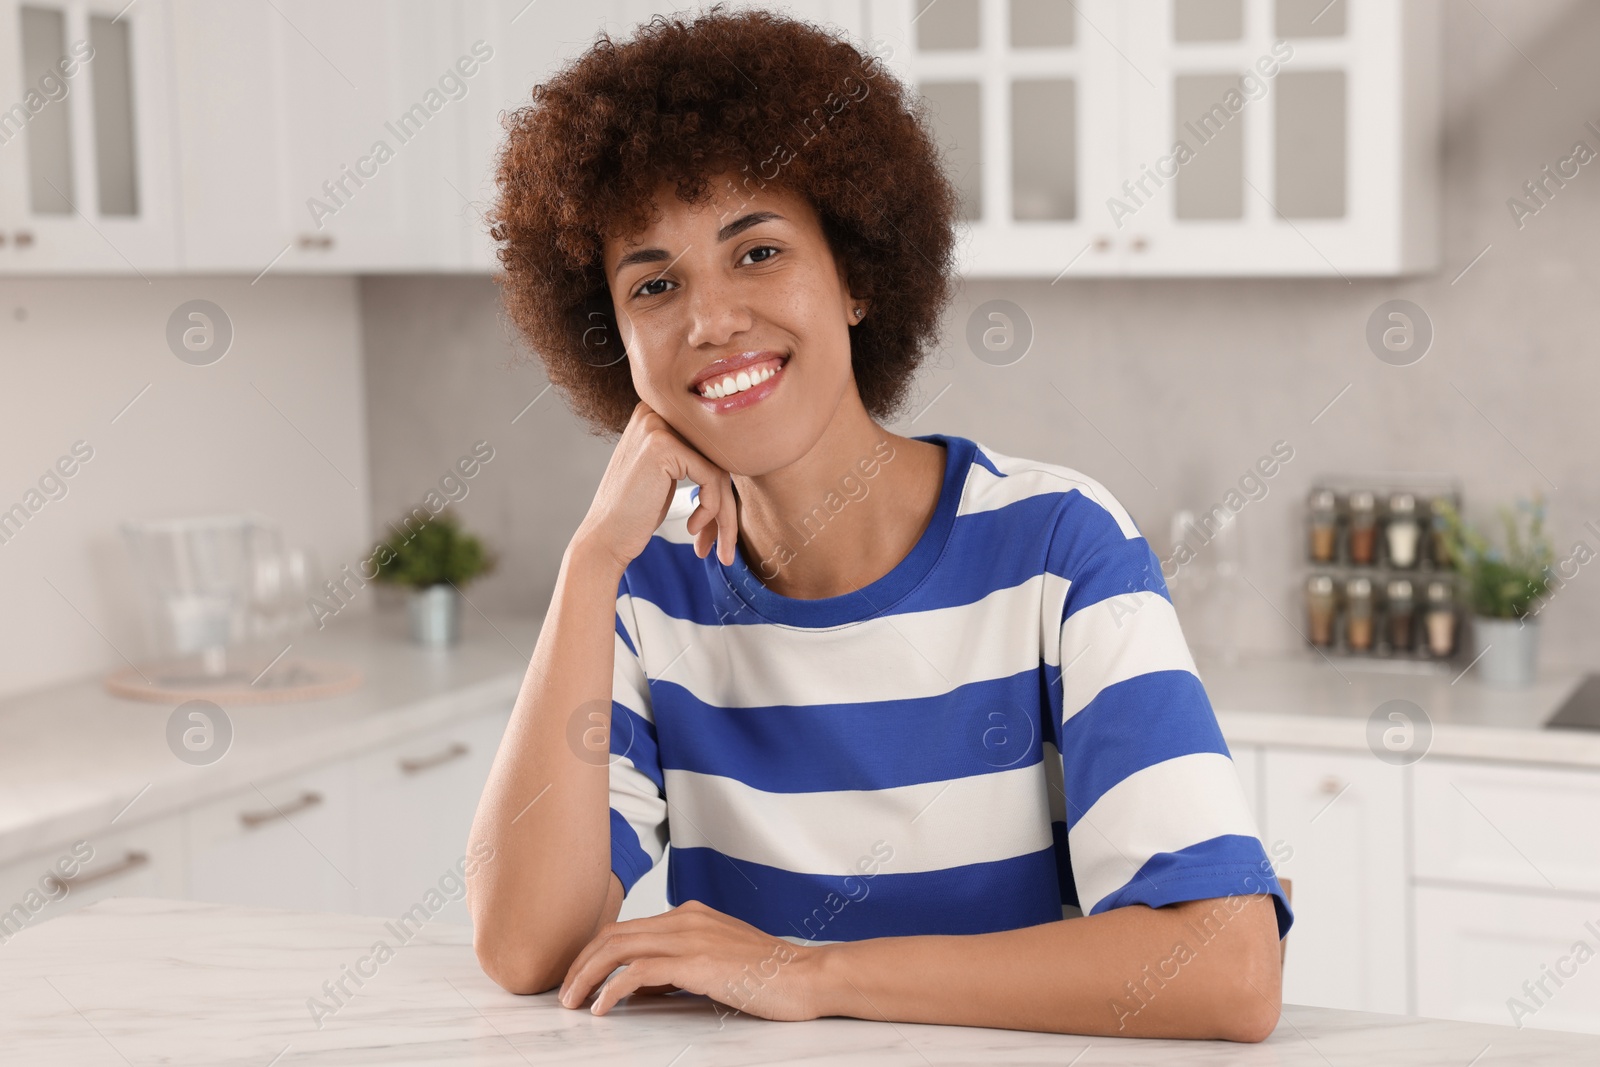 Photo of Happy young woman sitting at table in kitchen